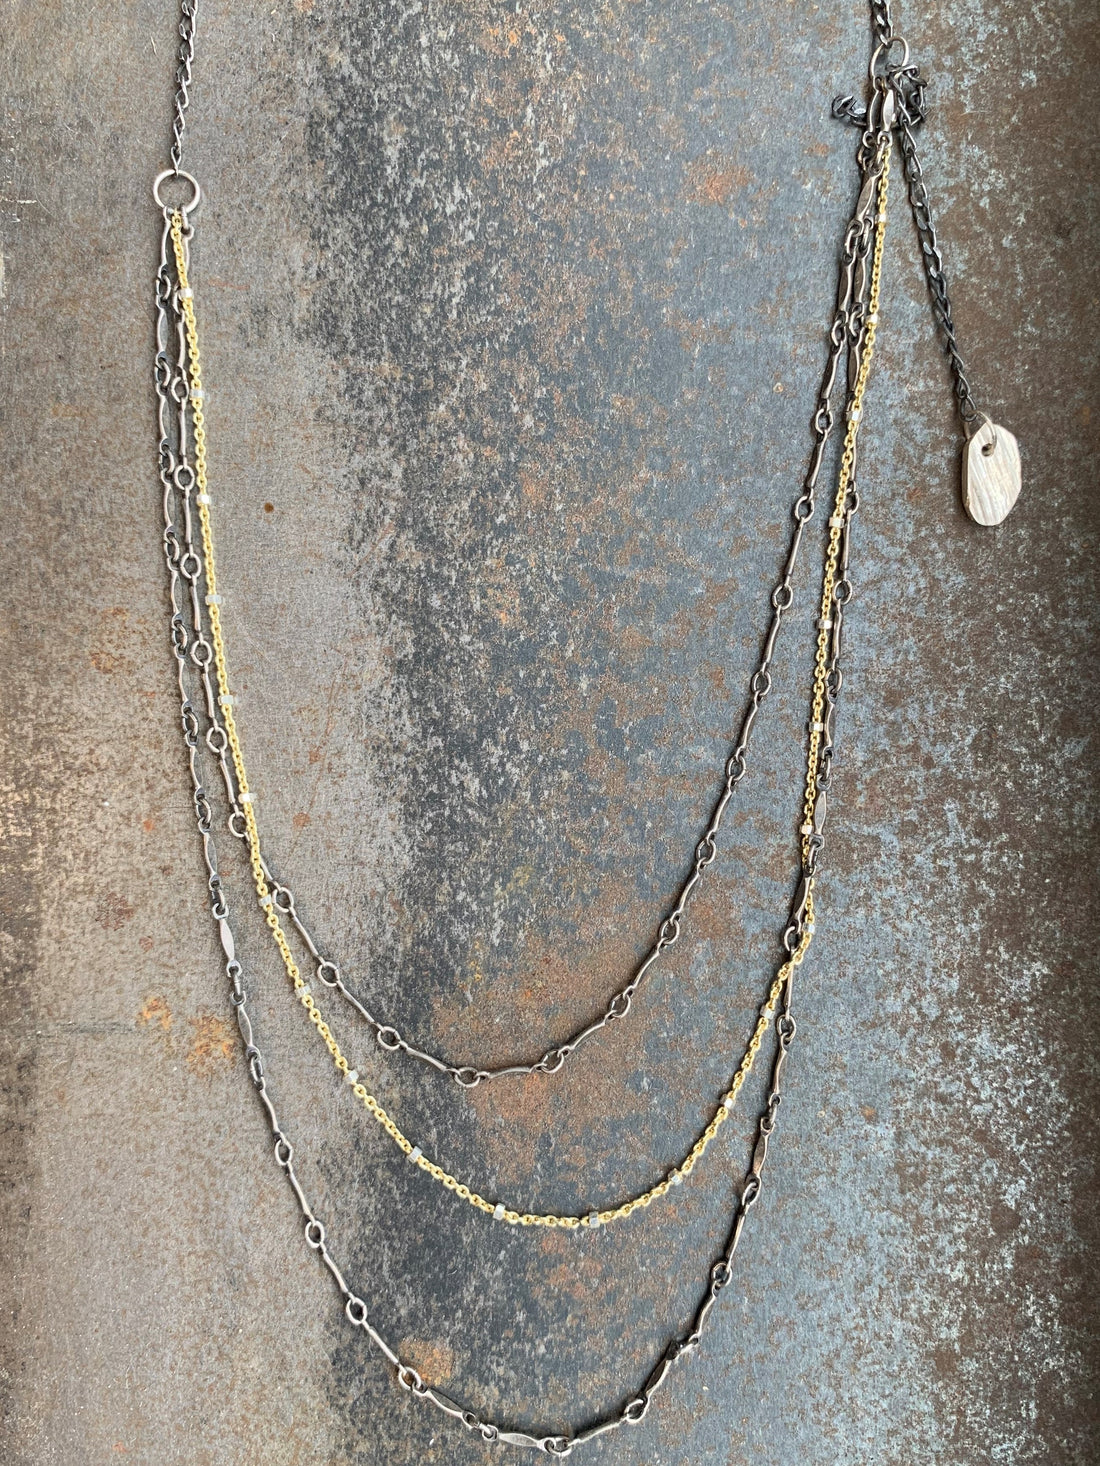 Mixed Metal Necklaces by Kristen Mara